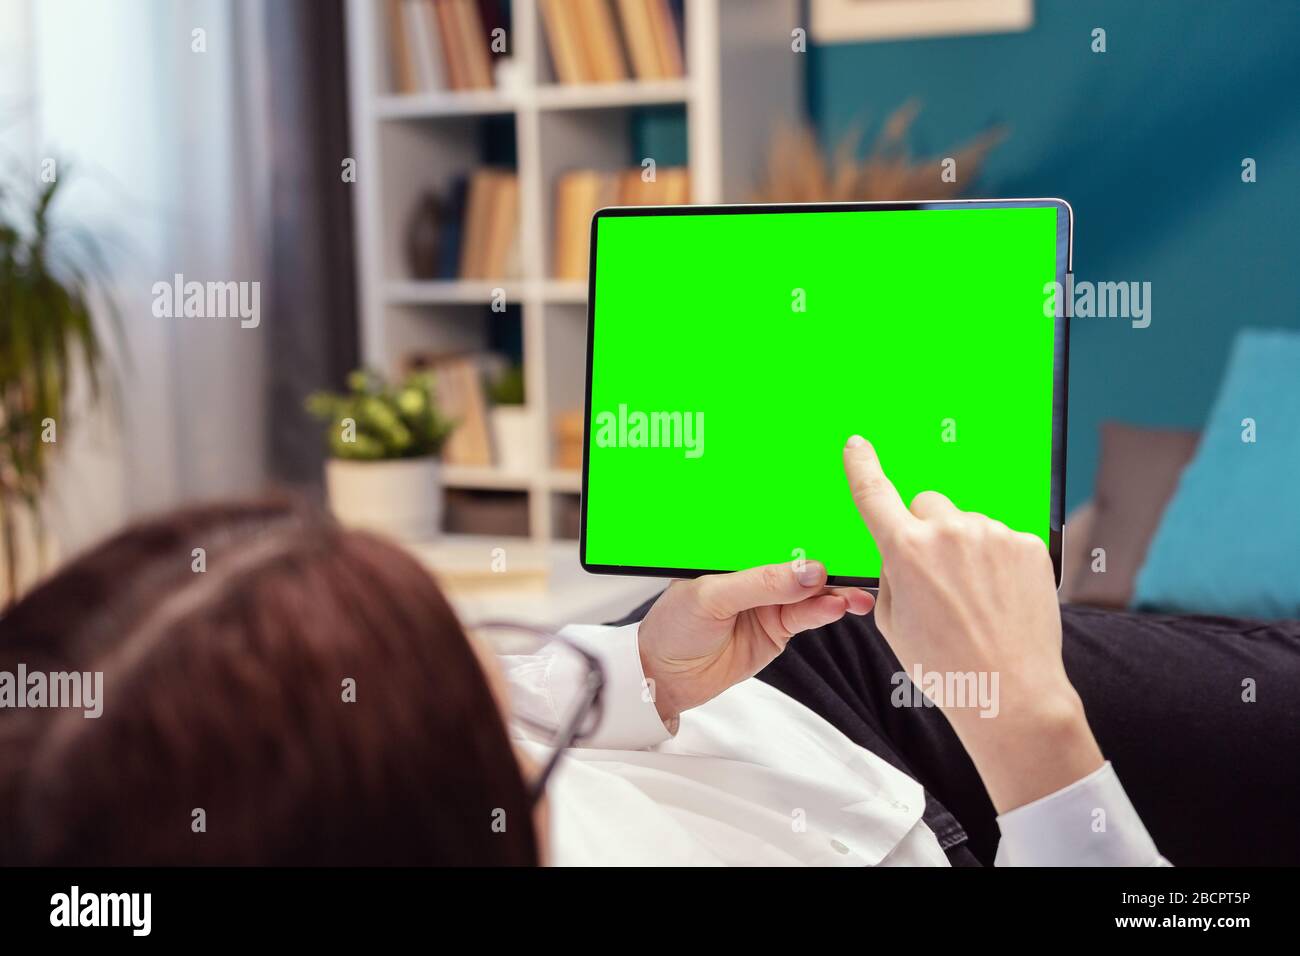 Person touching tablet green screen Stock Photo